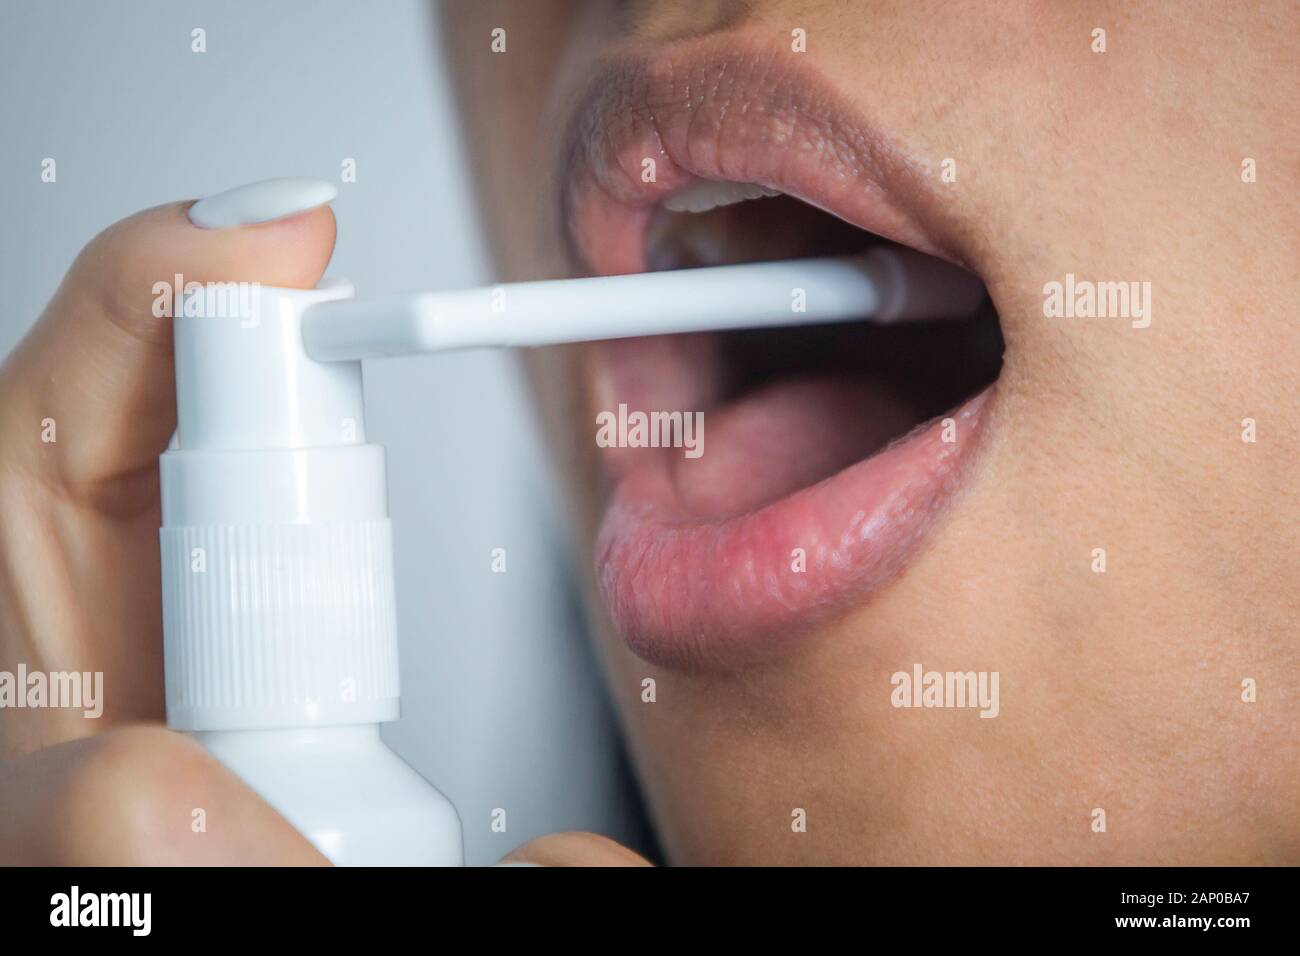 Woman using a throat spray with medicine to reduce infection and soreness of throat. Stock Photo